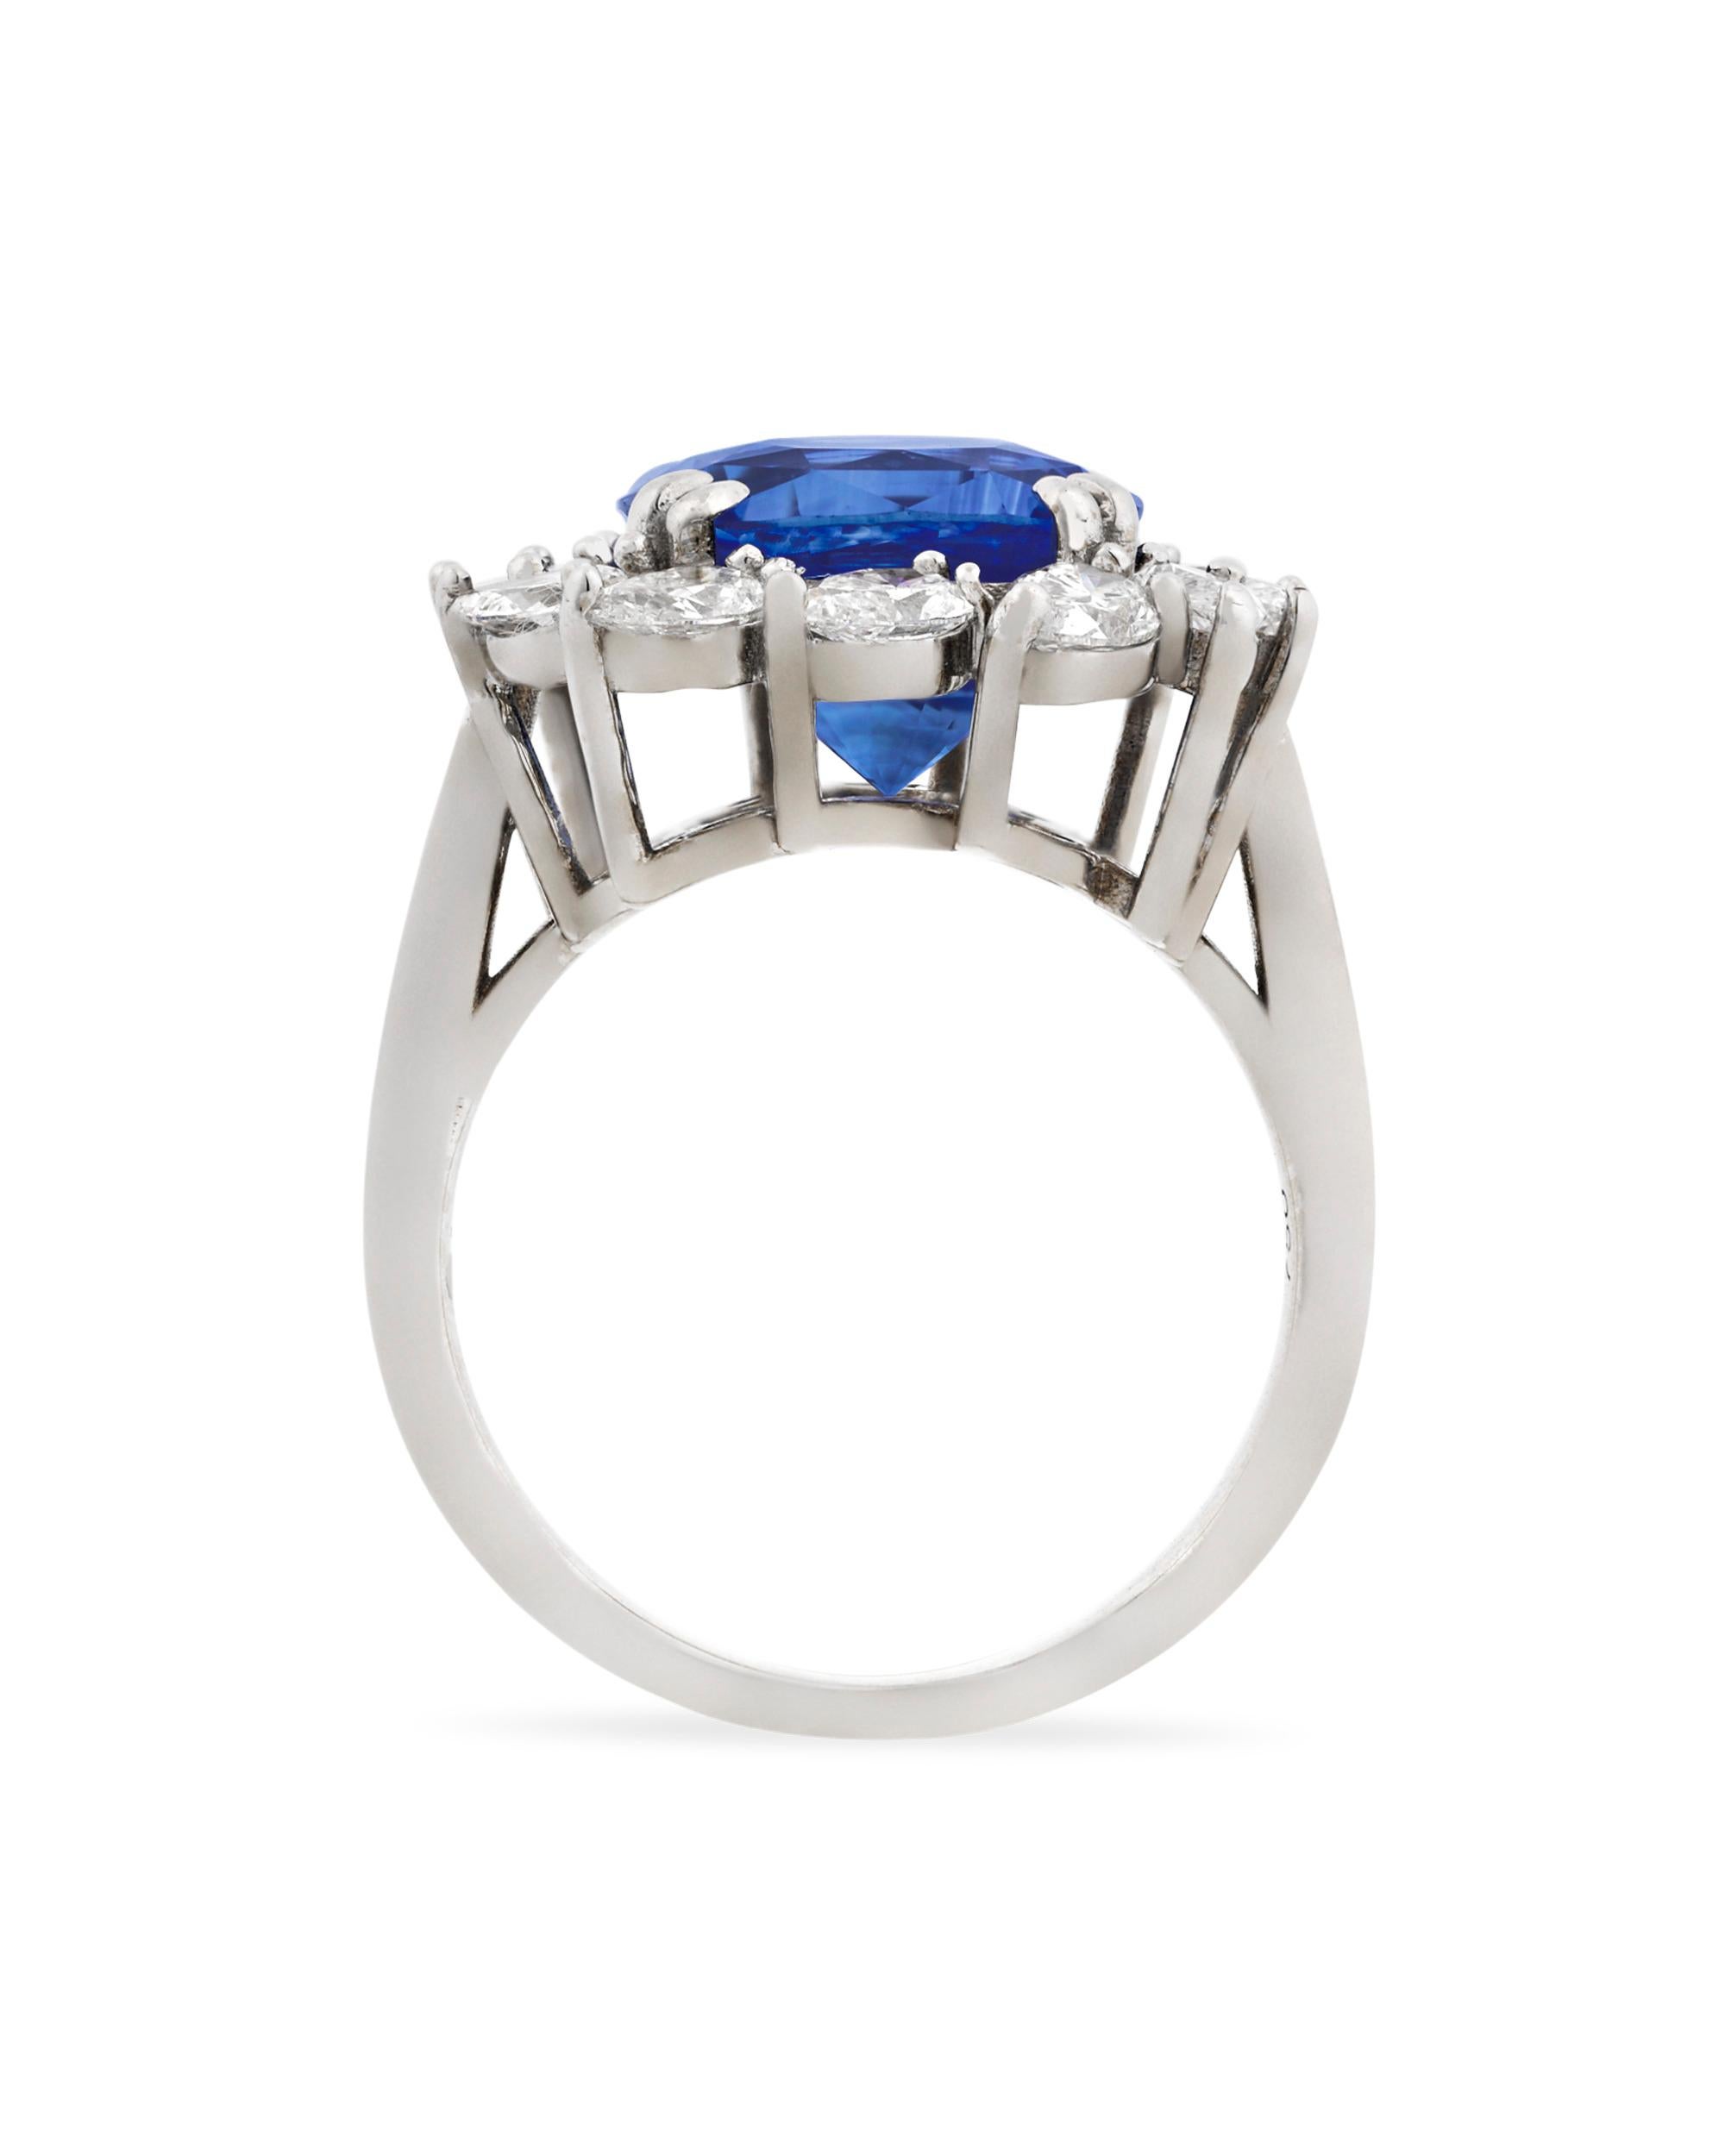 A dazzling Ceylon sapphire weighing an impressive 6.30 carats is the star of this ring. This cushion-shaped gem's rich royal blue hue is intensified by a halo of 12 pear-shaped white diamonds totaling 1.42 carats. Set in 18K white